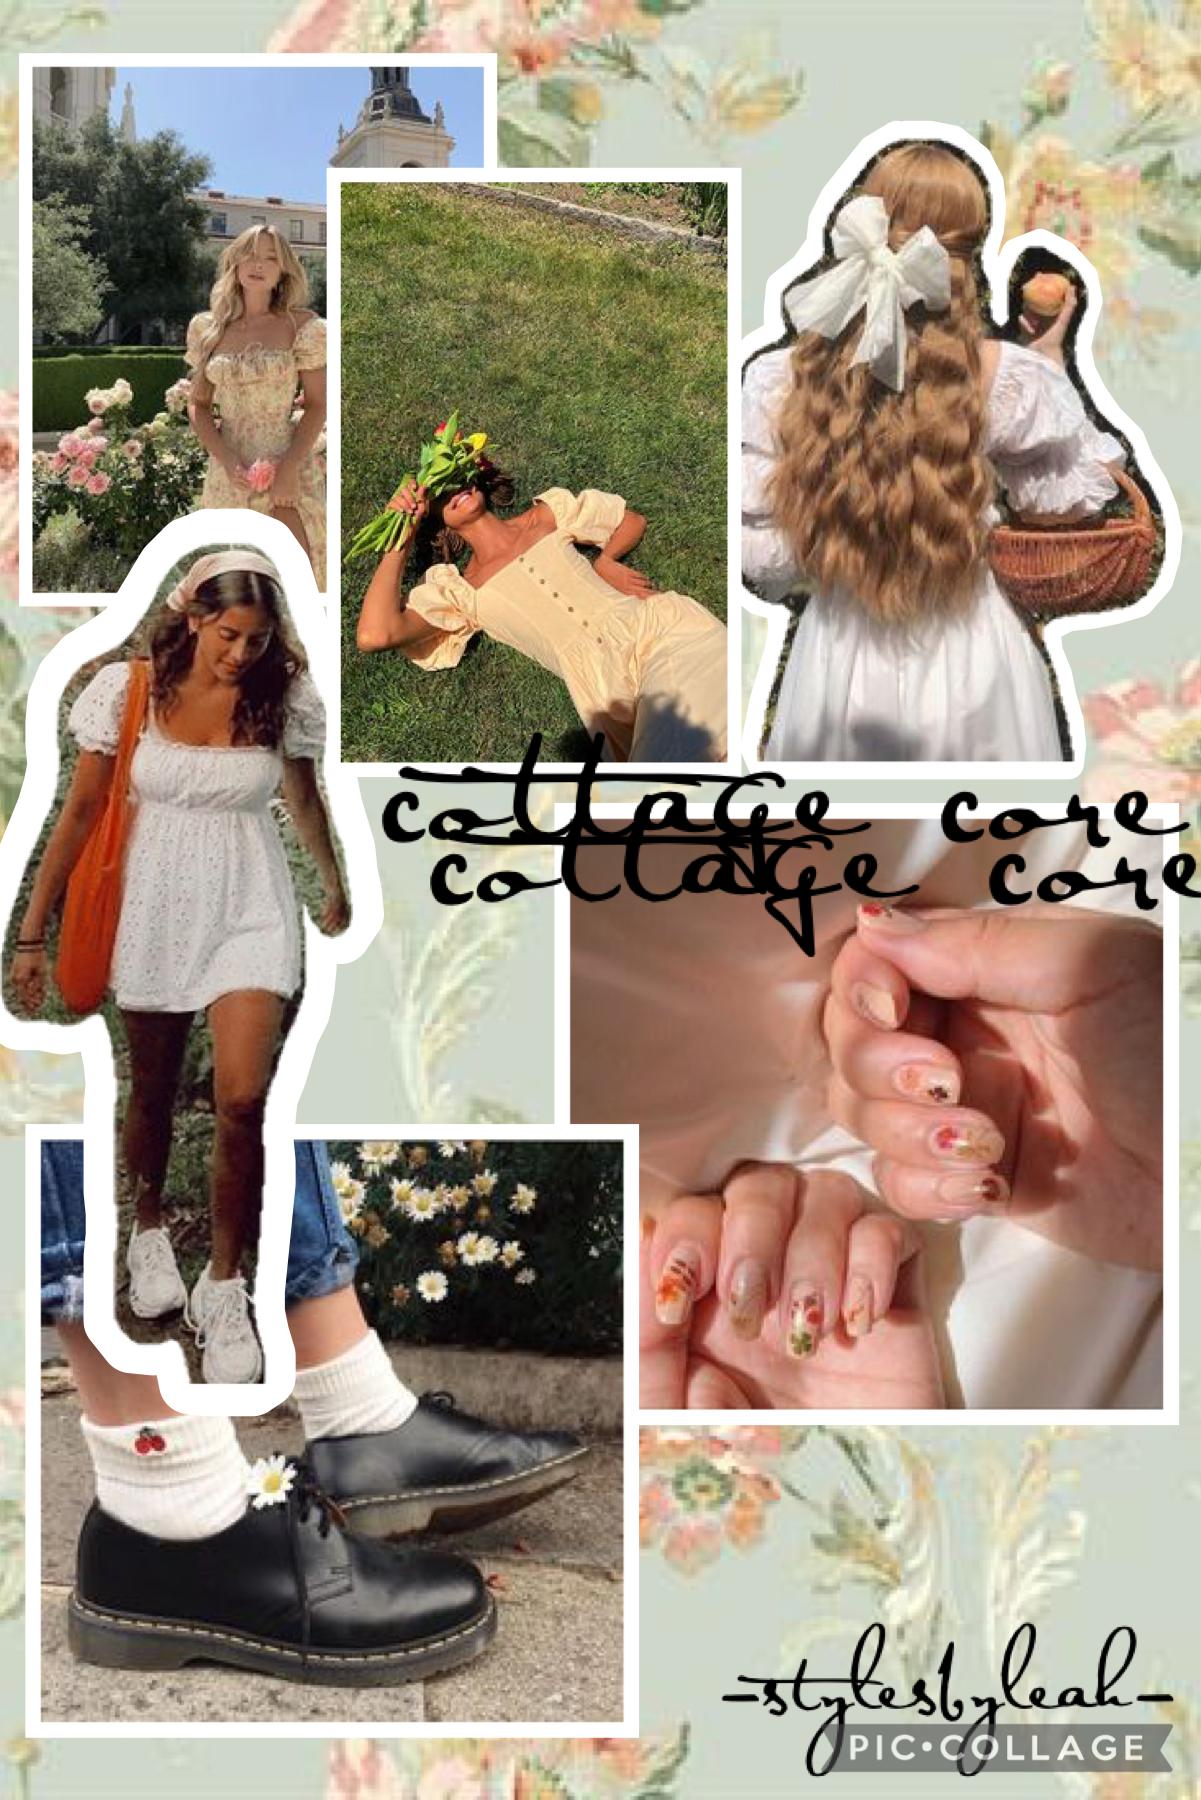 cottage core- requested by teenagetipsforgals